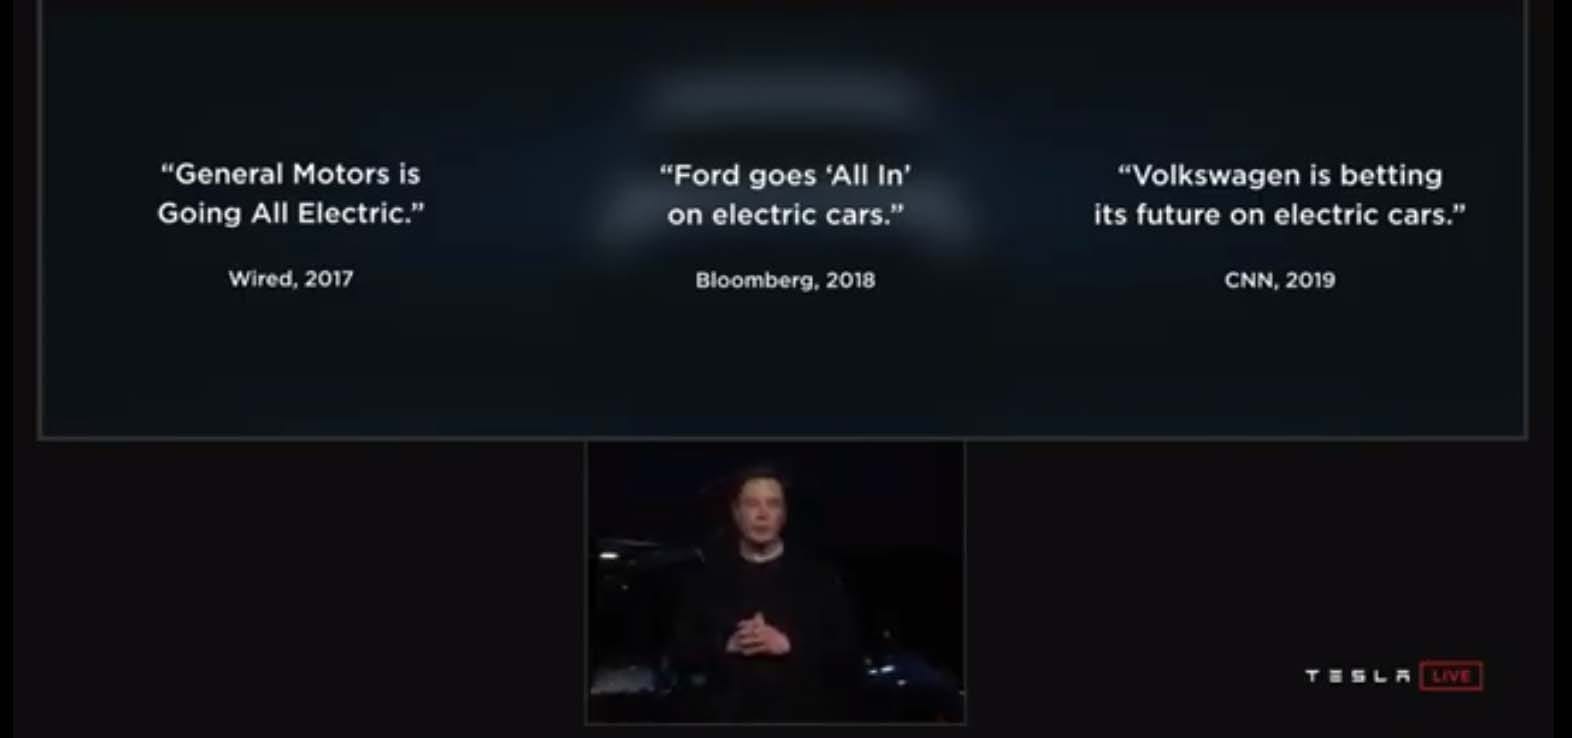 At his news conference introducing the Tesla Model Y SUV, CEO Elon Musk took credit for other automakers following his lead into electric vehicles. "Our goal all along has been to get the rest of the industry to go electric."